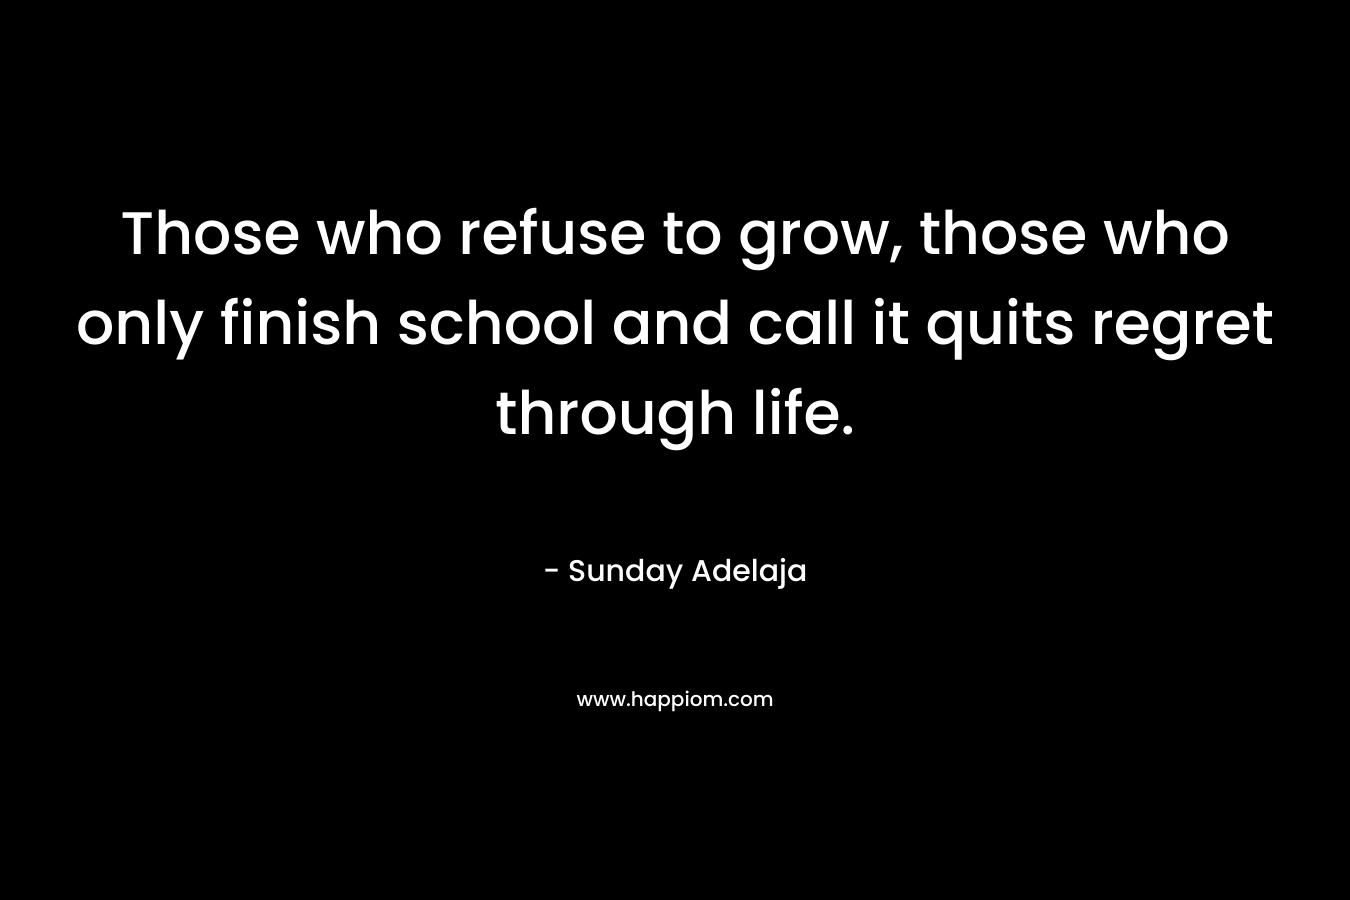 Those who refuse to grow, those who only finish school and call it quits regret through life.